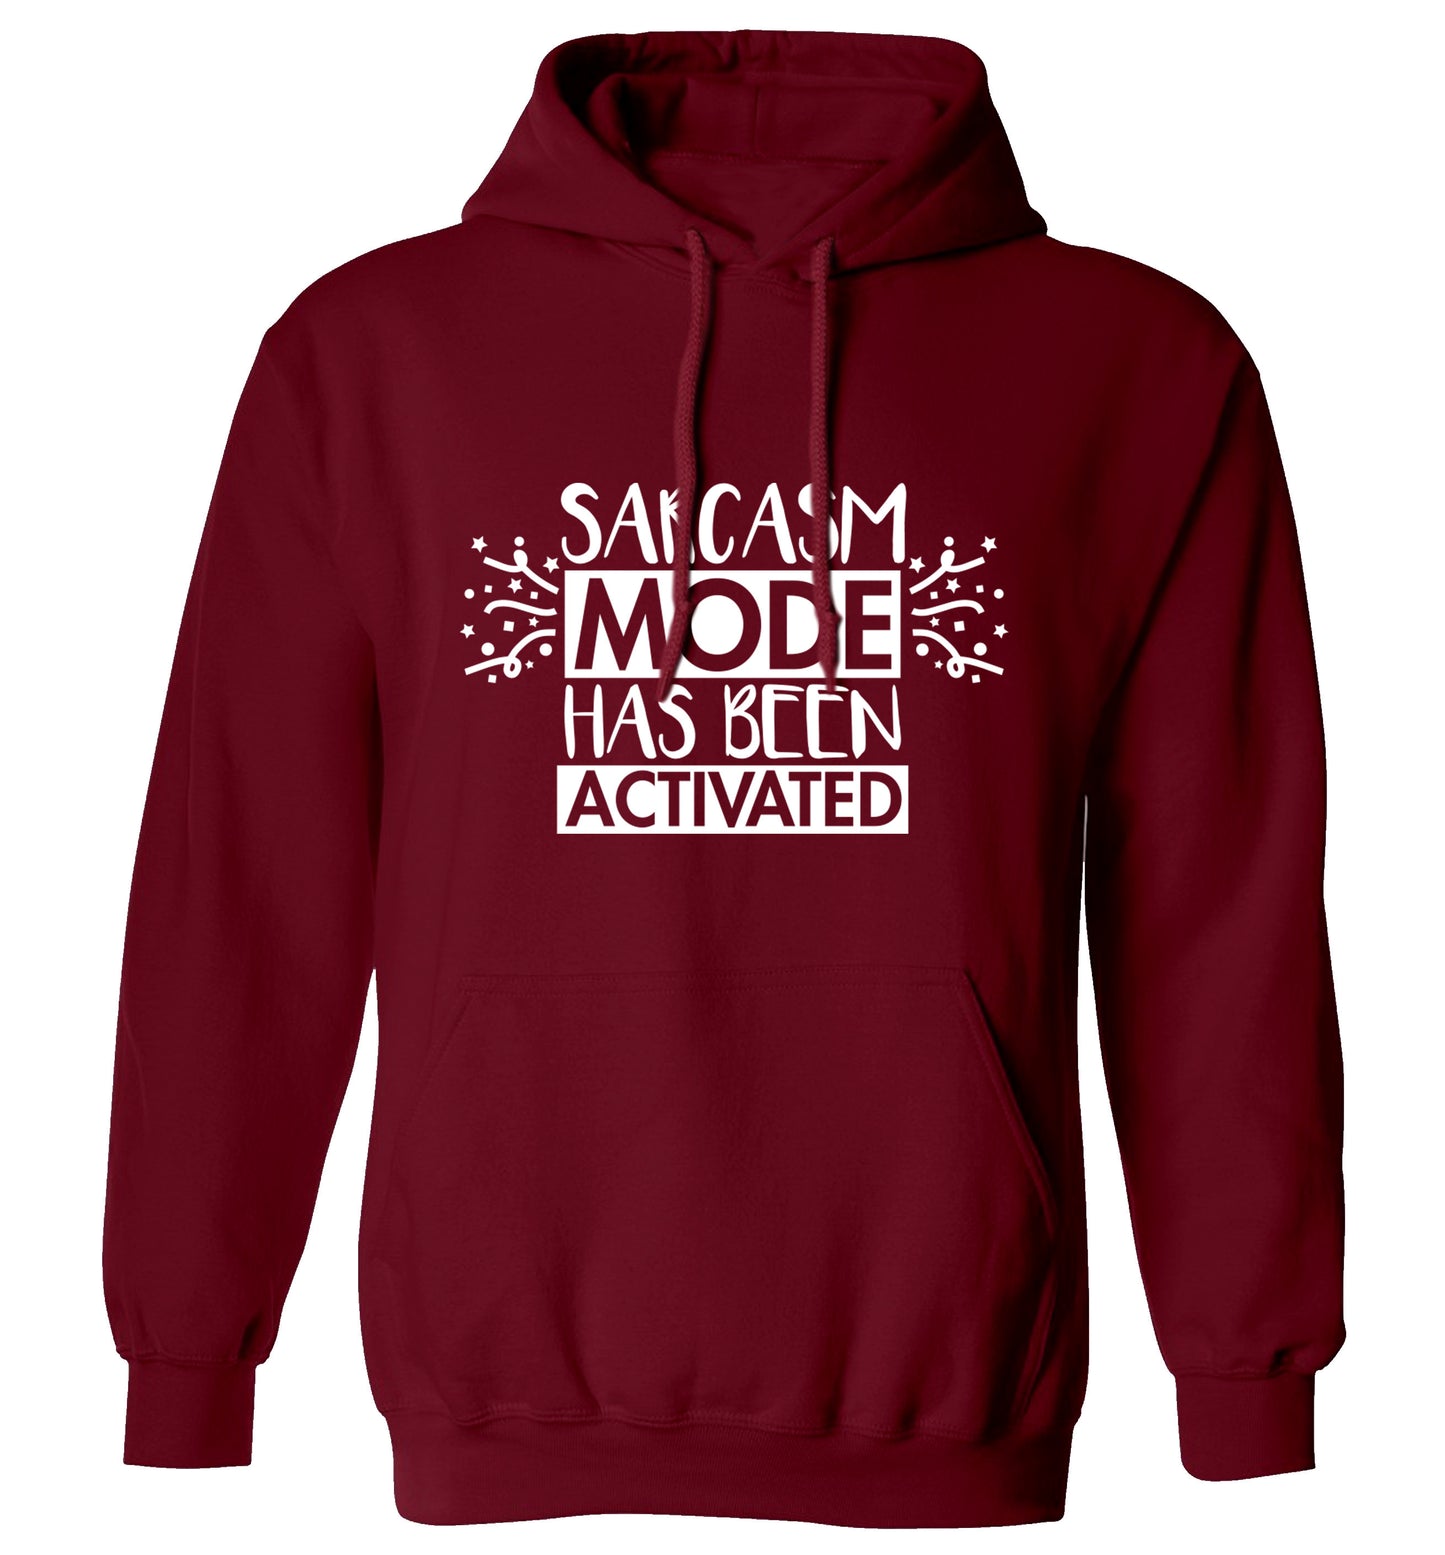 Sarcarsm mode has been activated adults unisex maroon hoodie 2XL